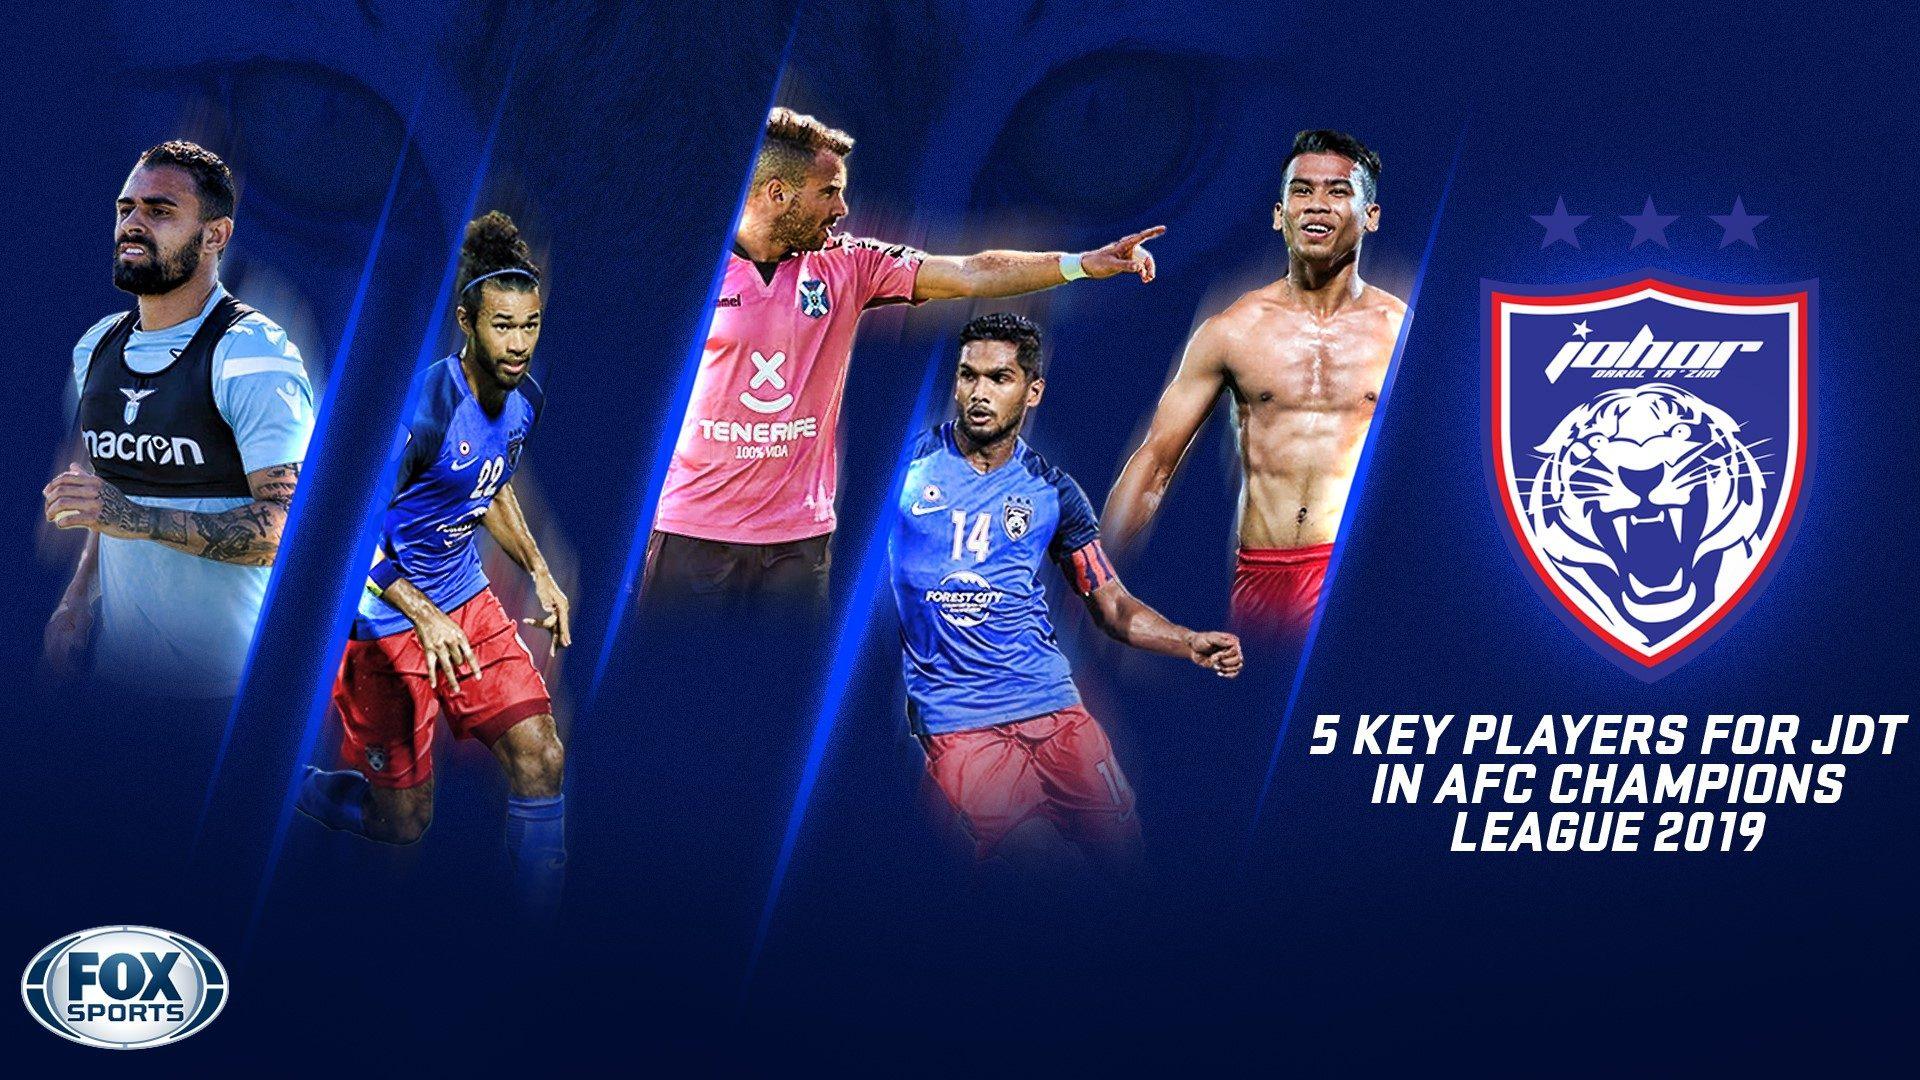 players who will be key for Johor Darul Ta'zim in AFC Champions League